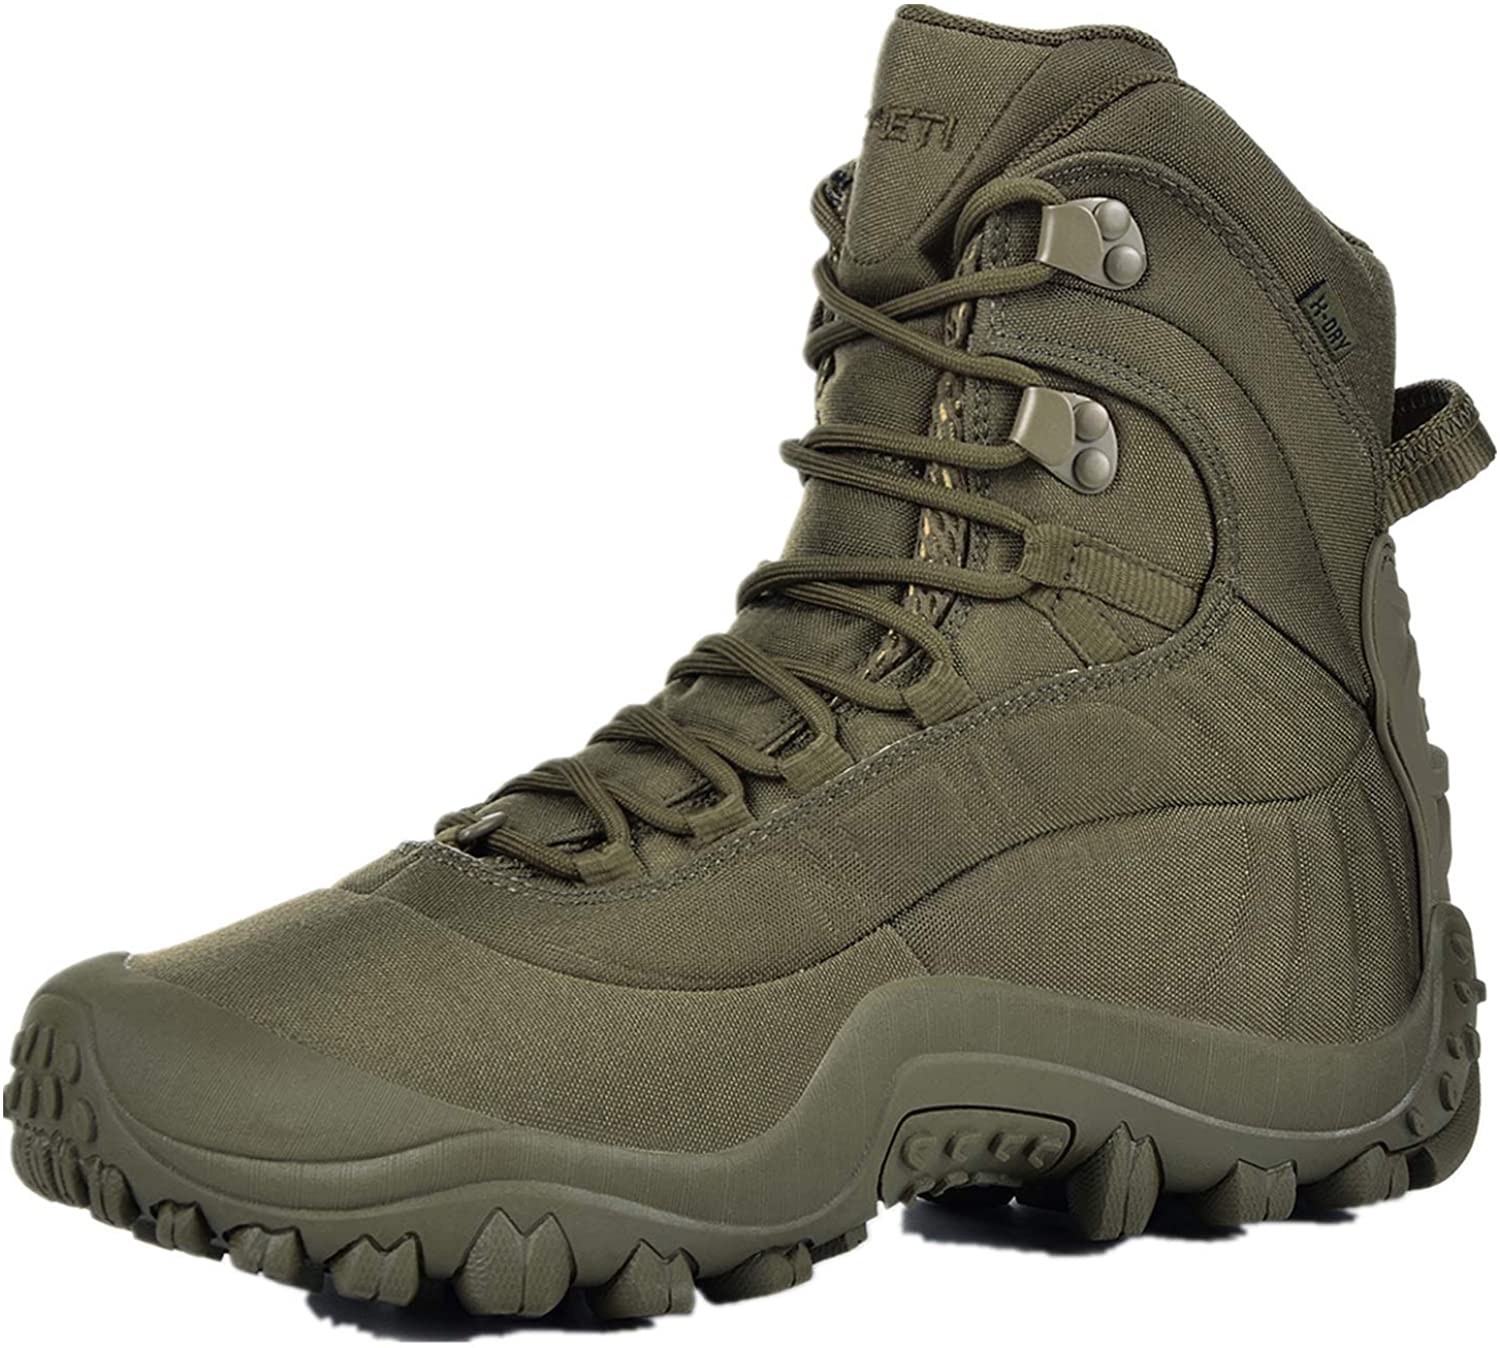 SKENARY Men’s Tactical Boots 8” Mid Combat Boots Waterproof Military Boots 